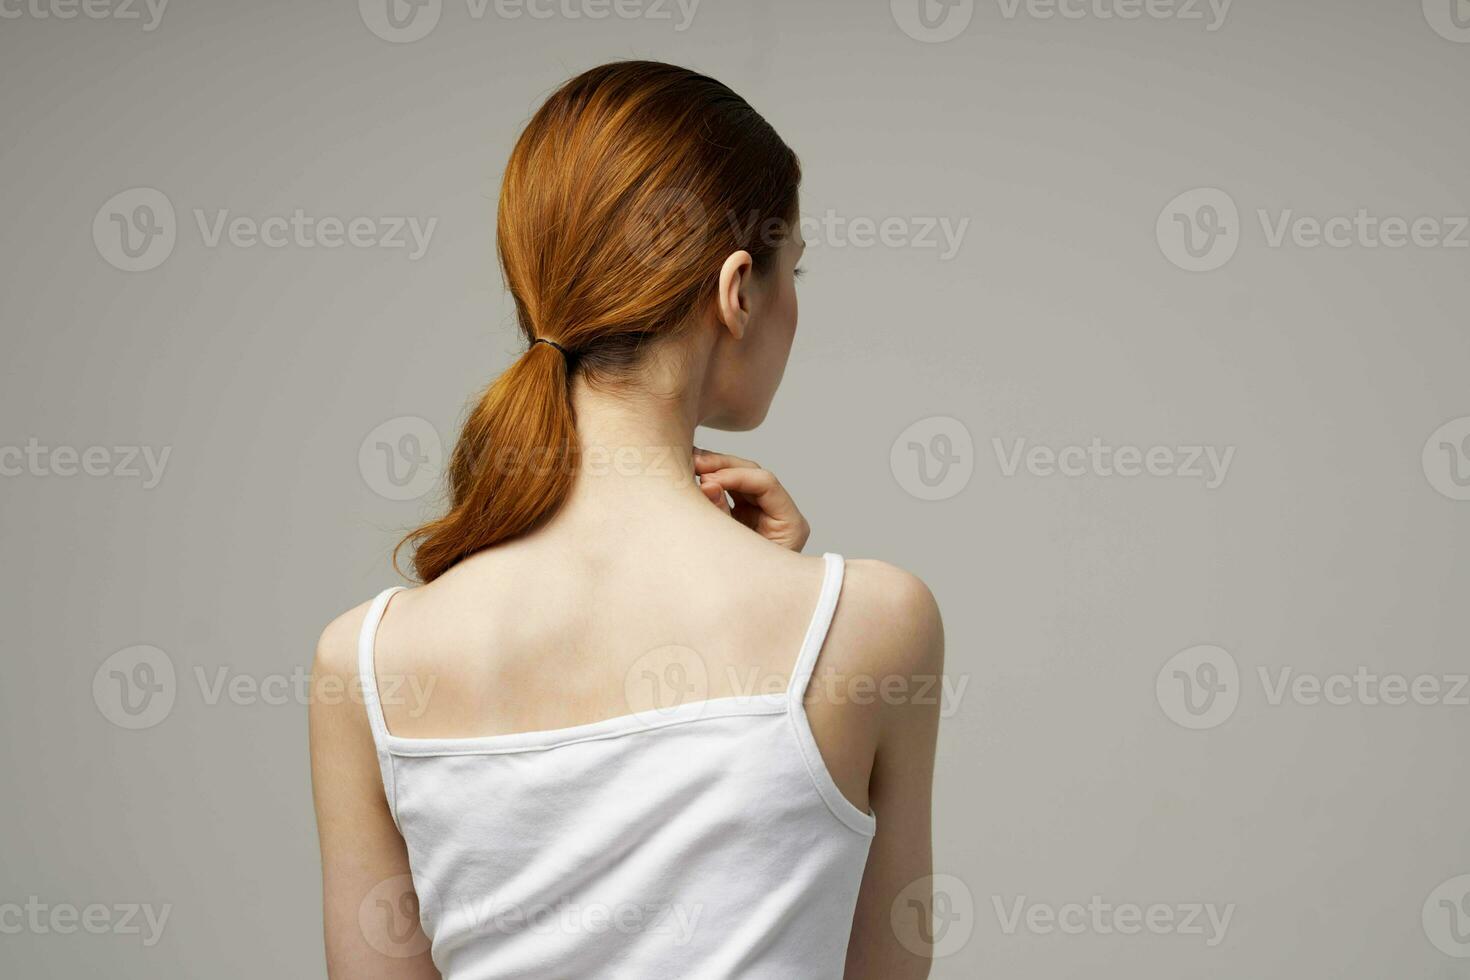 woman rheumatism pain in the neck health problems light background photo